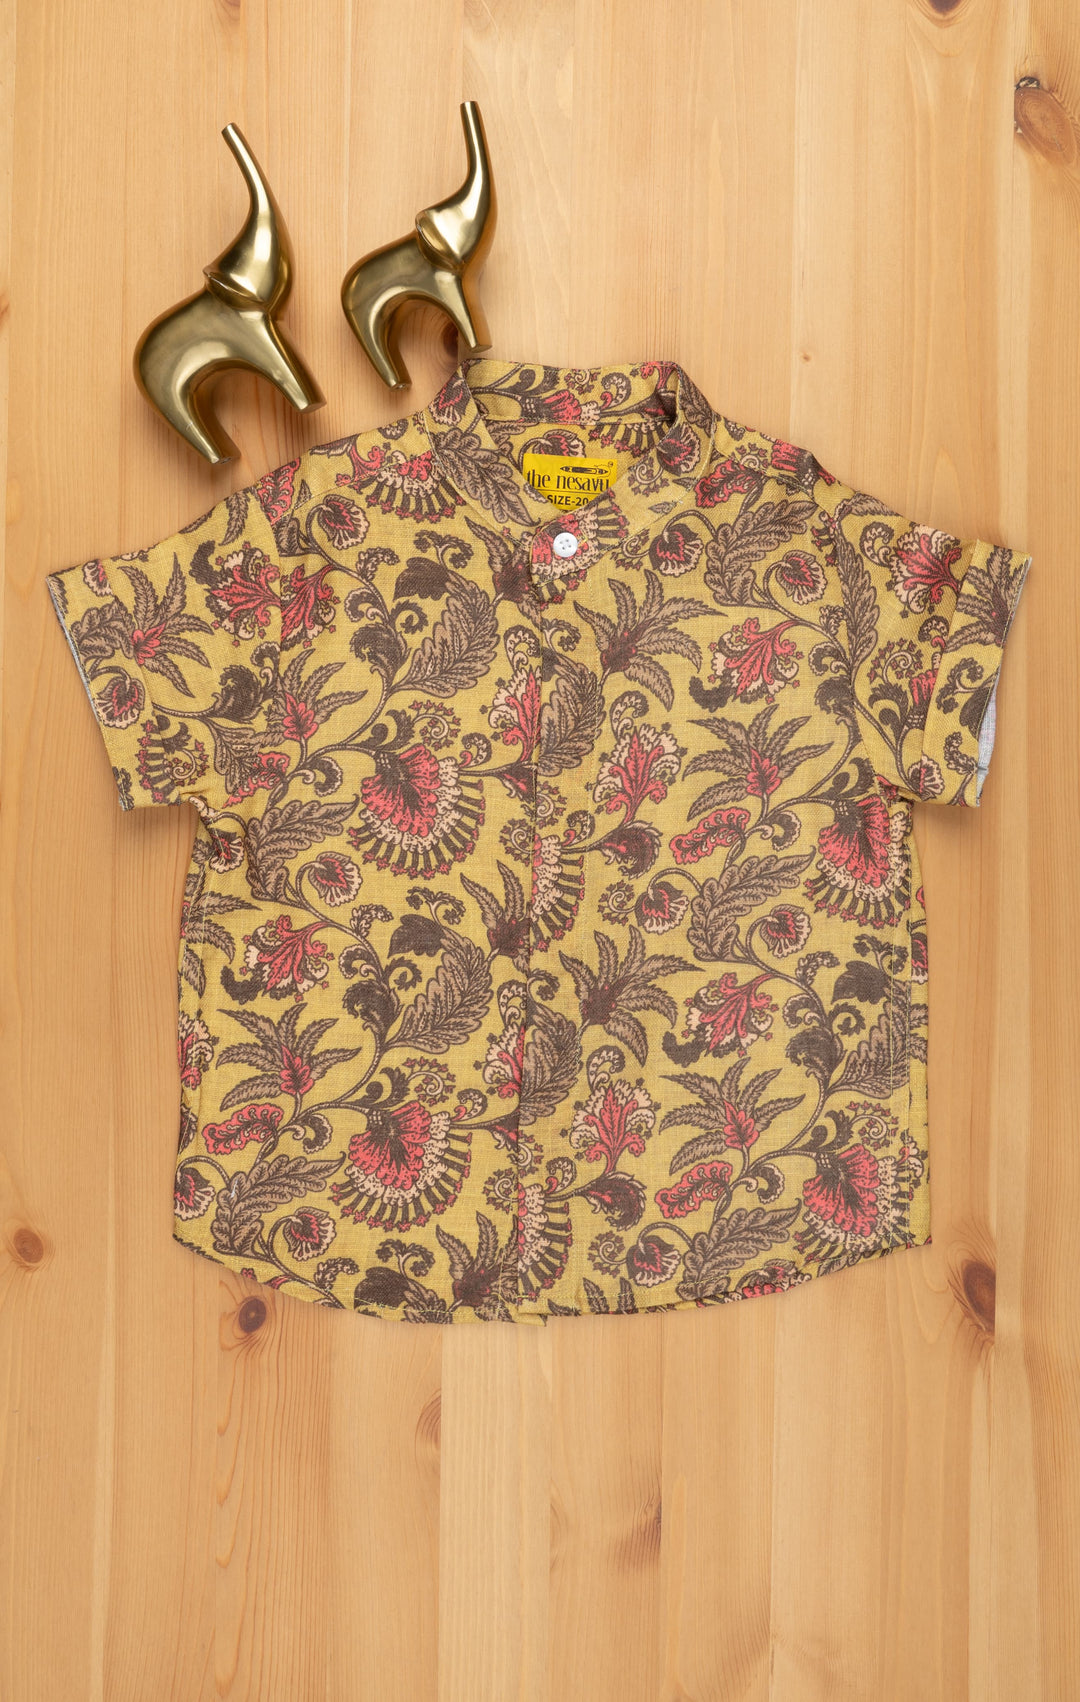 The Nesavu Boys Linen Shirt Floral Whimsy: Linen Boys' Shirt with Playful Floral Prints for a Joyful Look Nesavu 14 (6M) / Yellow / Linen BS059 Playful Floral Prints Linen Shirt | Baby Shirt Online | The Nesavu